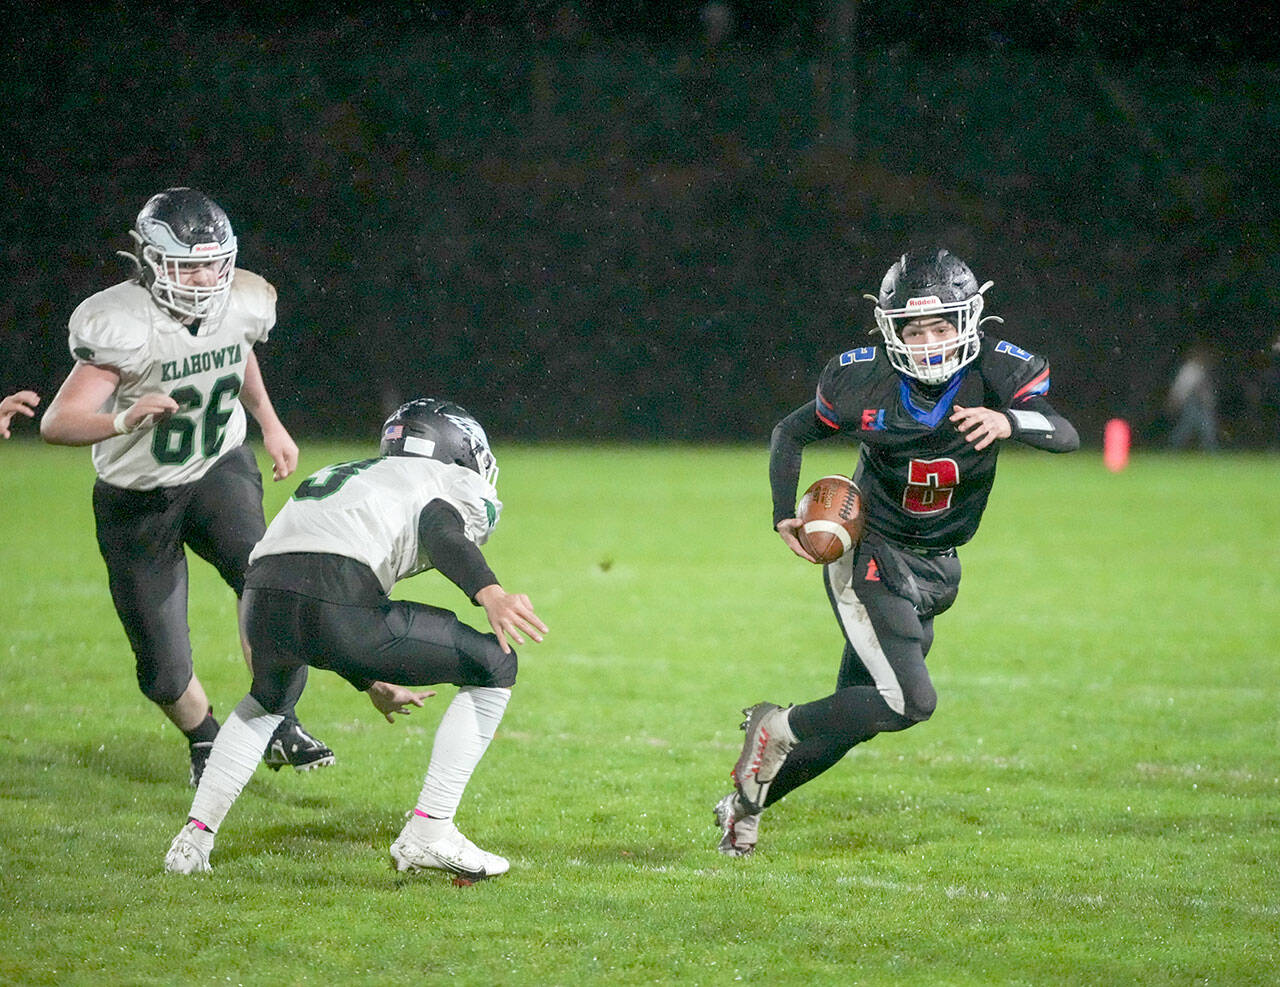 Steve Mullensky/for Peninsula Daily News East Jefferson’s Brody Moore dodges away from Klahowya players and picks up yardage during the Rivals’ 18-13 Senior Night win at Memorial Field on Friday in Port Townsend.